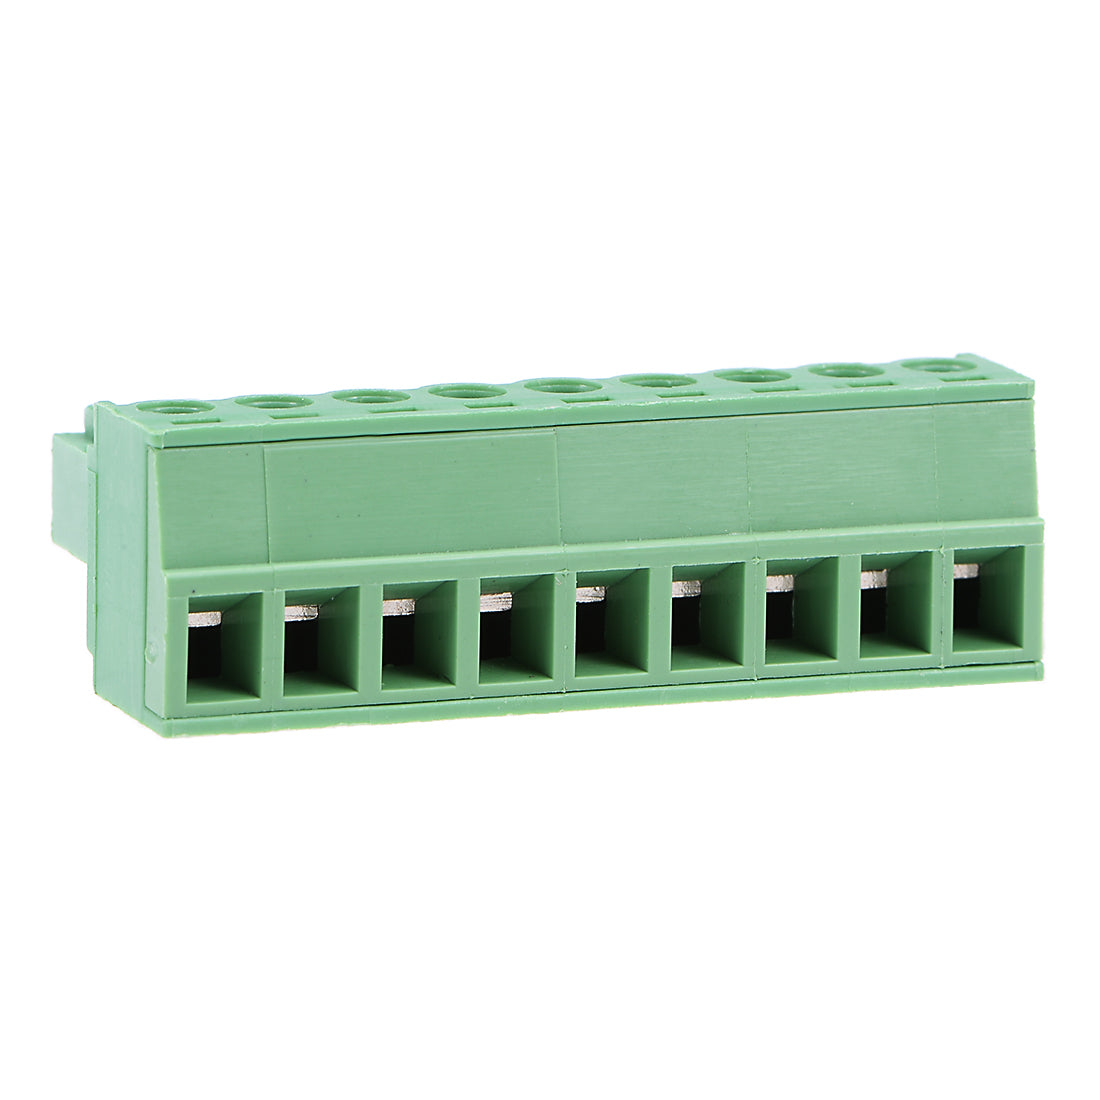 uxcell Uxcell 6Pcs AC300V 8A 3.81mm Pitch 9P Flat Angle Needle Seat Insert-In PCB Terminal Block Connector green